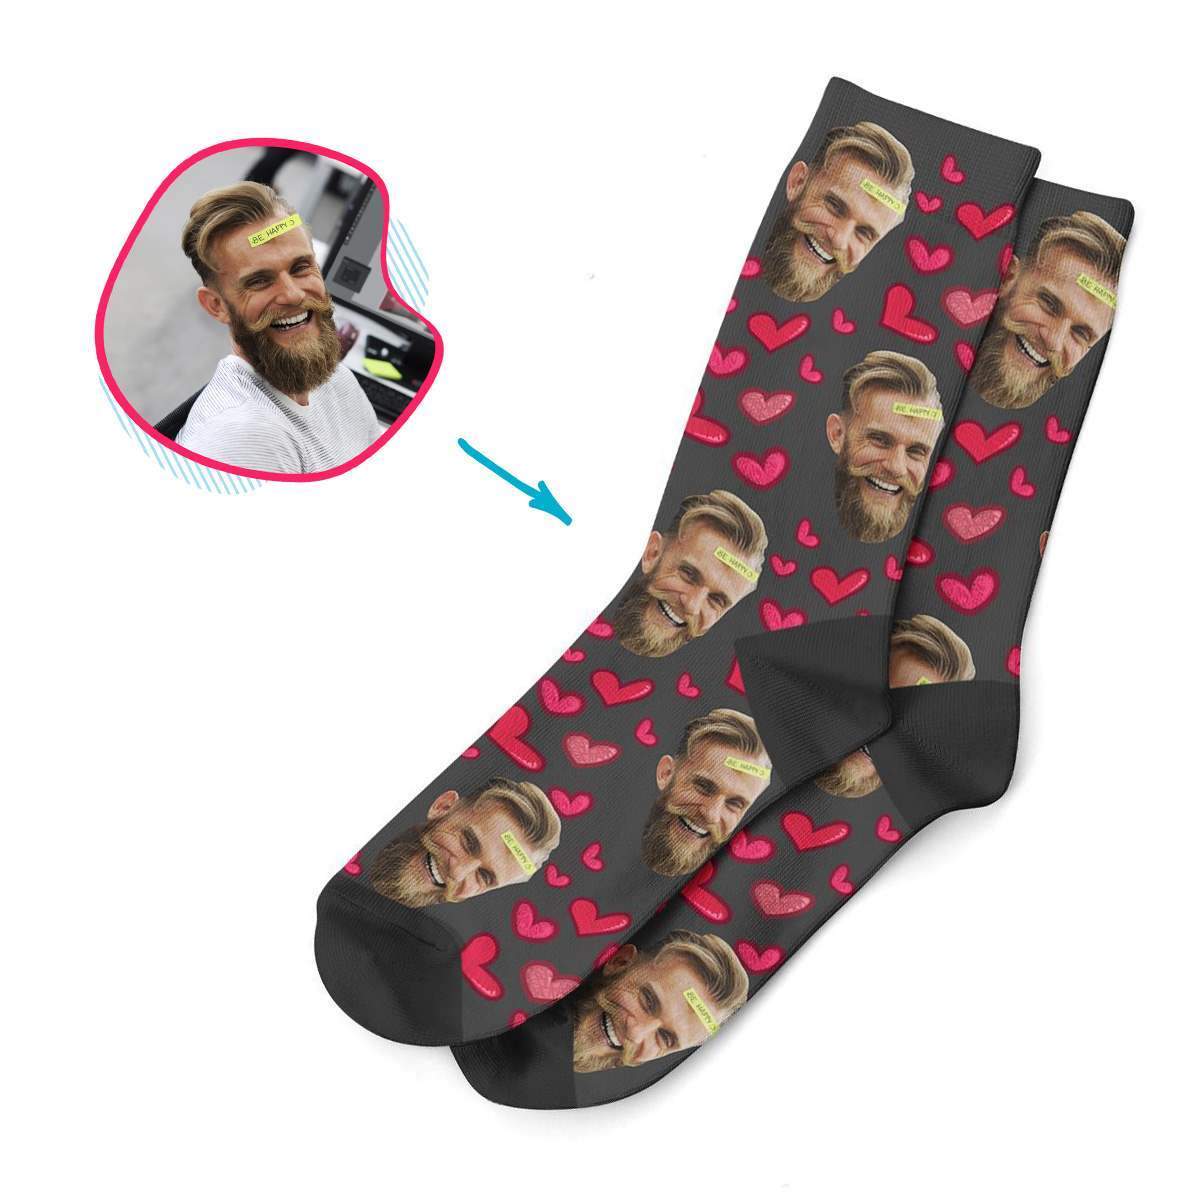 dark Heart socks personalized with photo of face printed on them